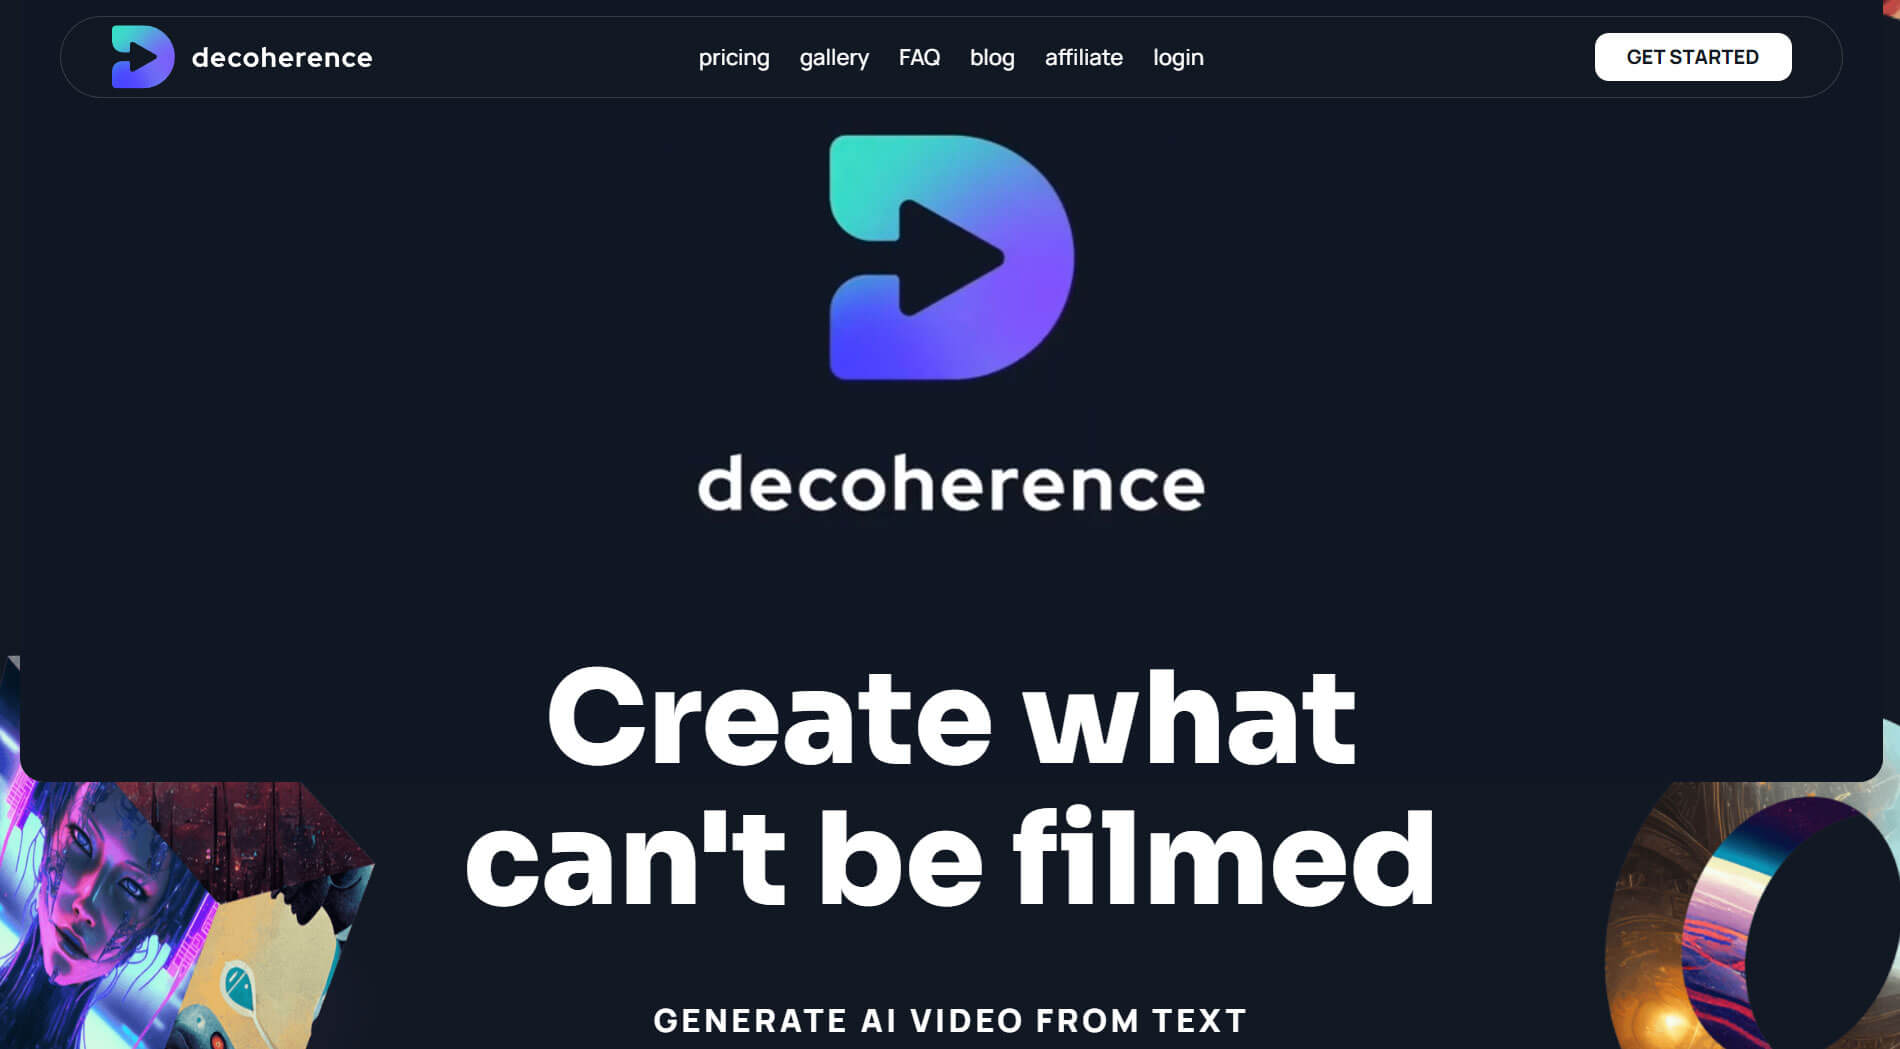 decoherence